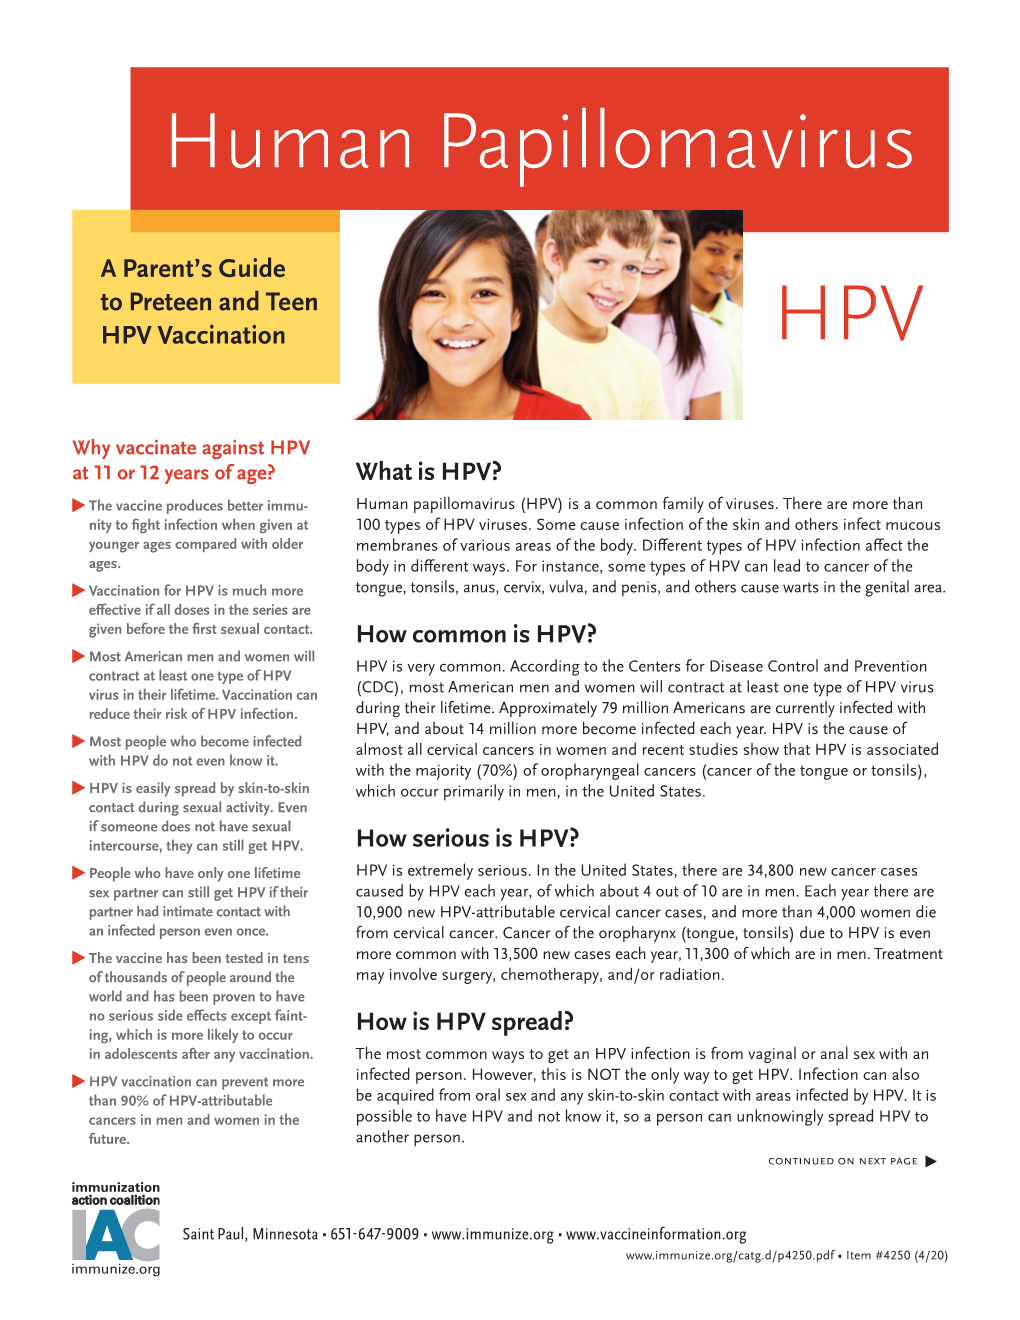 HPV Vaccine: a Parent's Guide